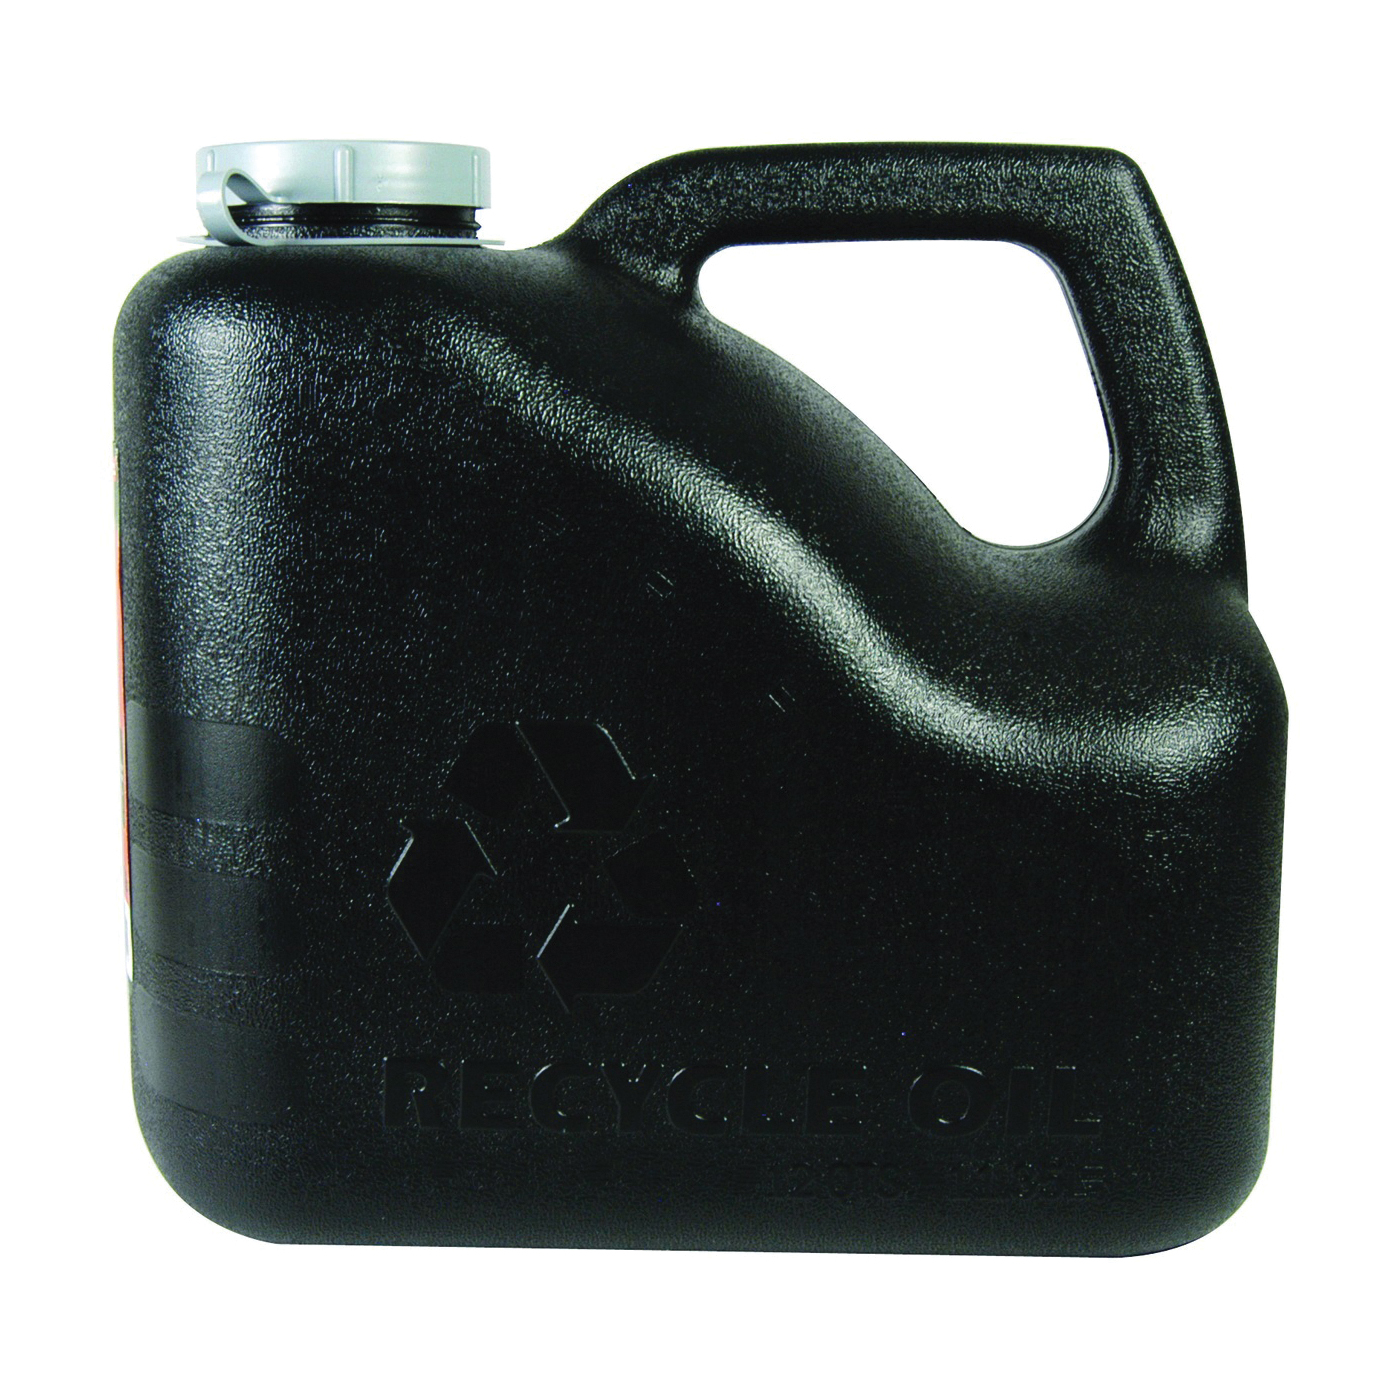 FloTool 11849 Oil Recycle Can, Black - 1